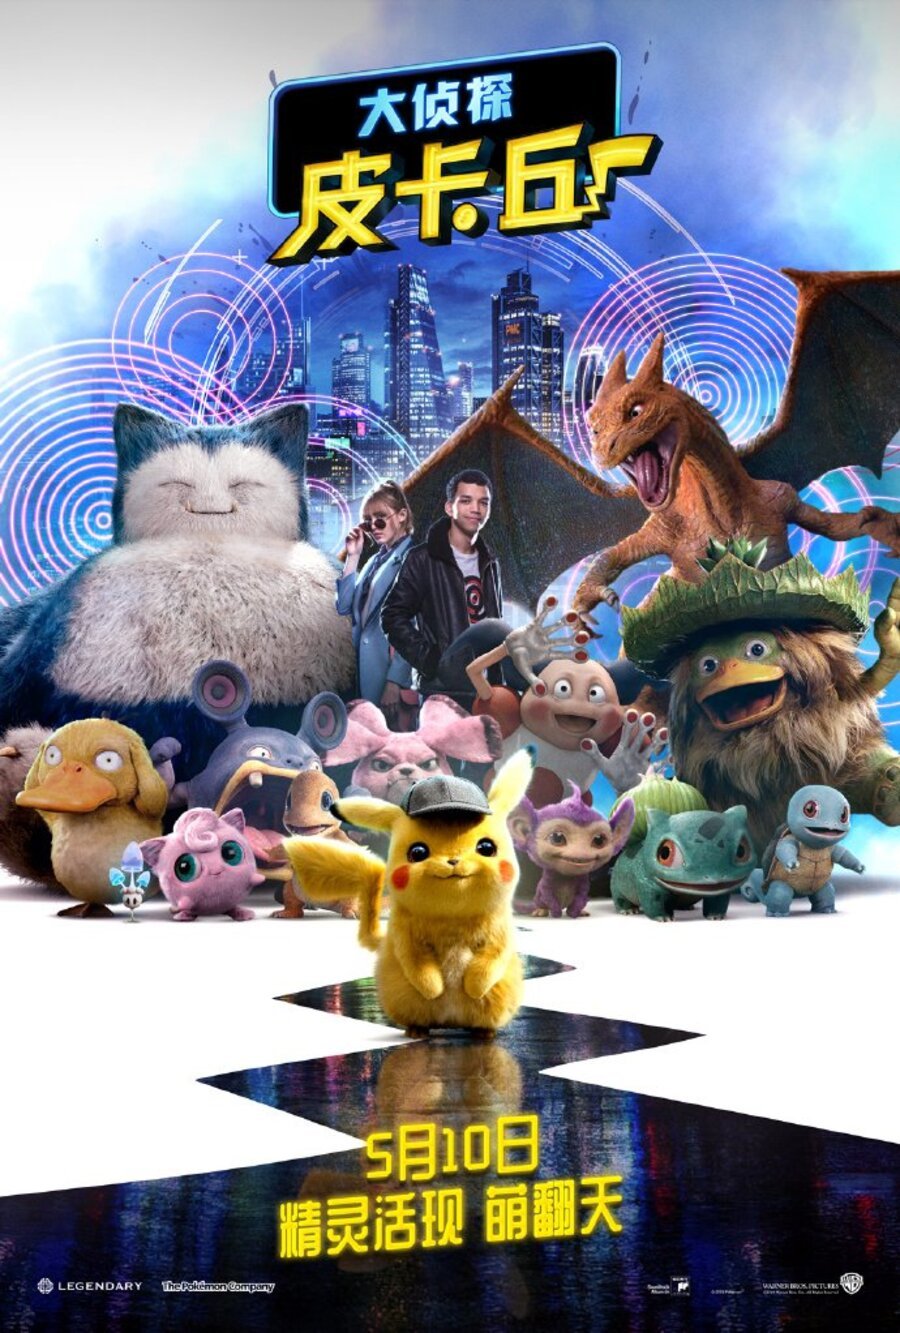 Pokémon Go' Update: Shiny Aipom and More Included in 'Detective Pikachu'  Event